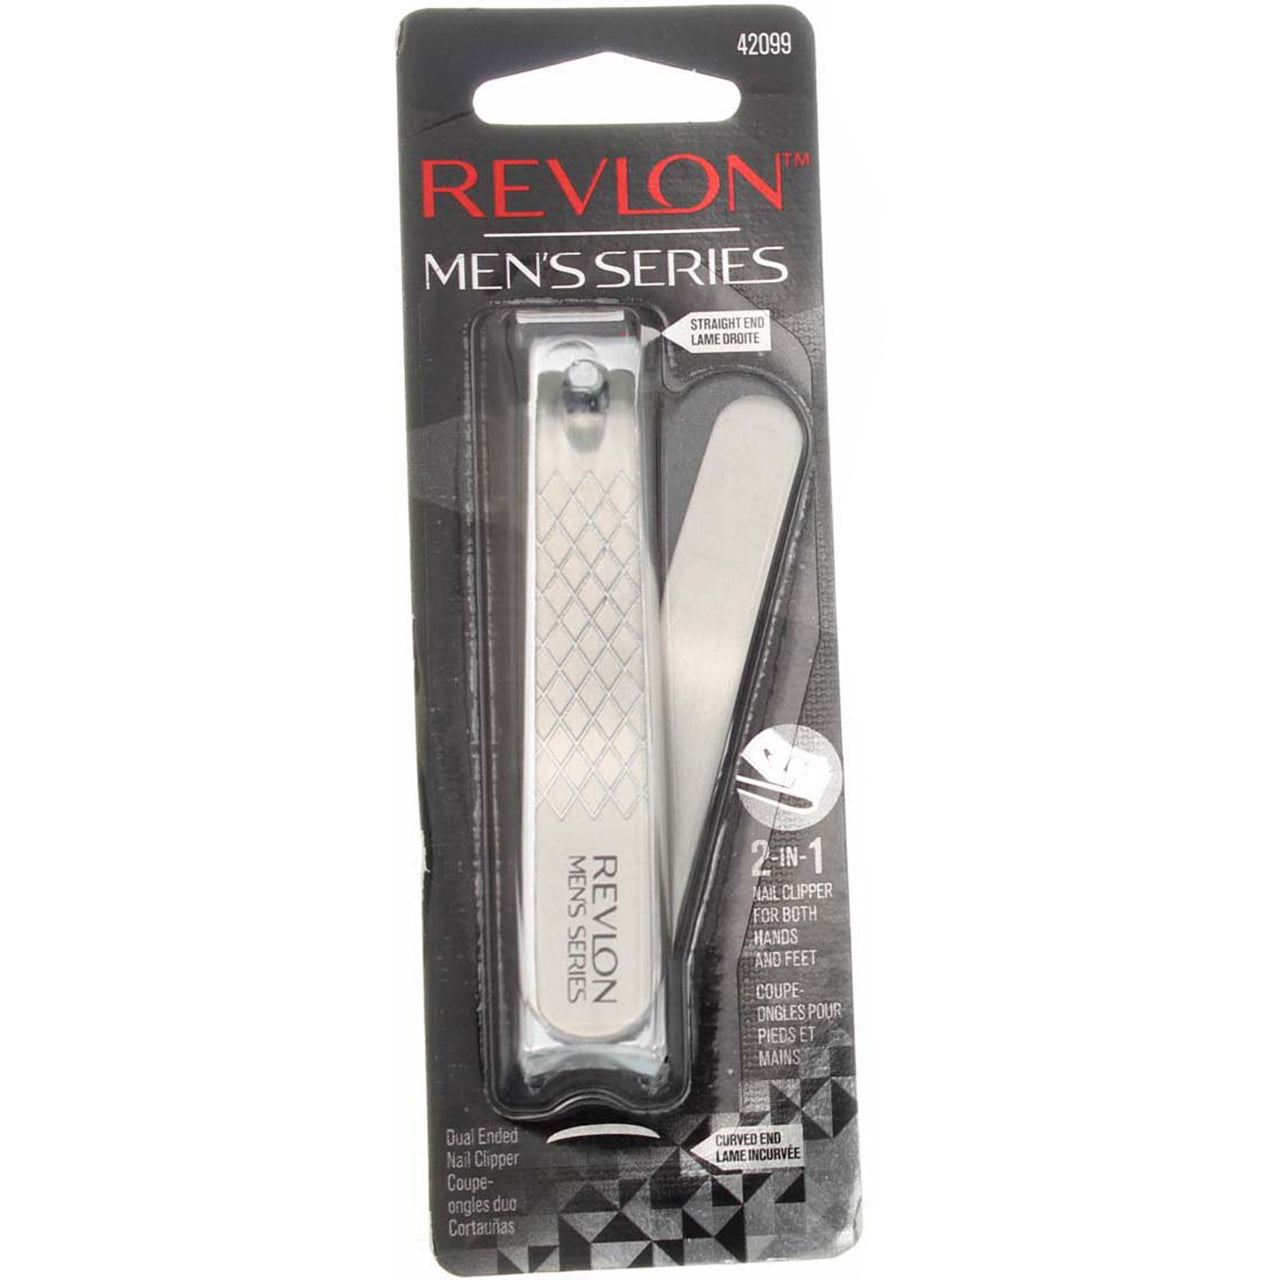 Revlon Catch-All Nail Clipper with Catcher, Stainless Steel Curved